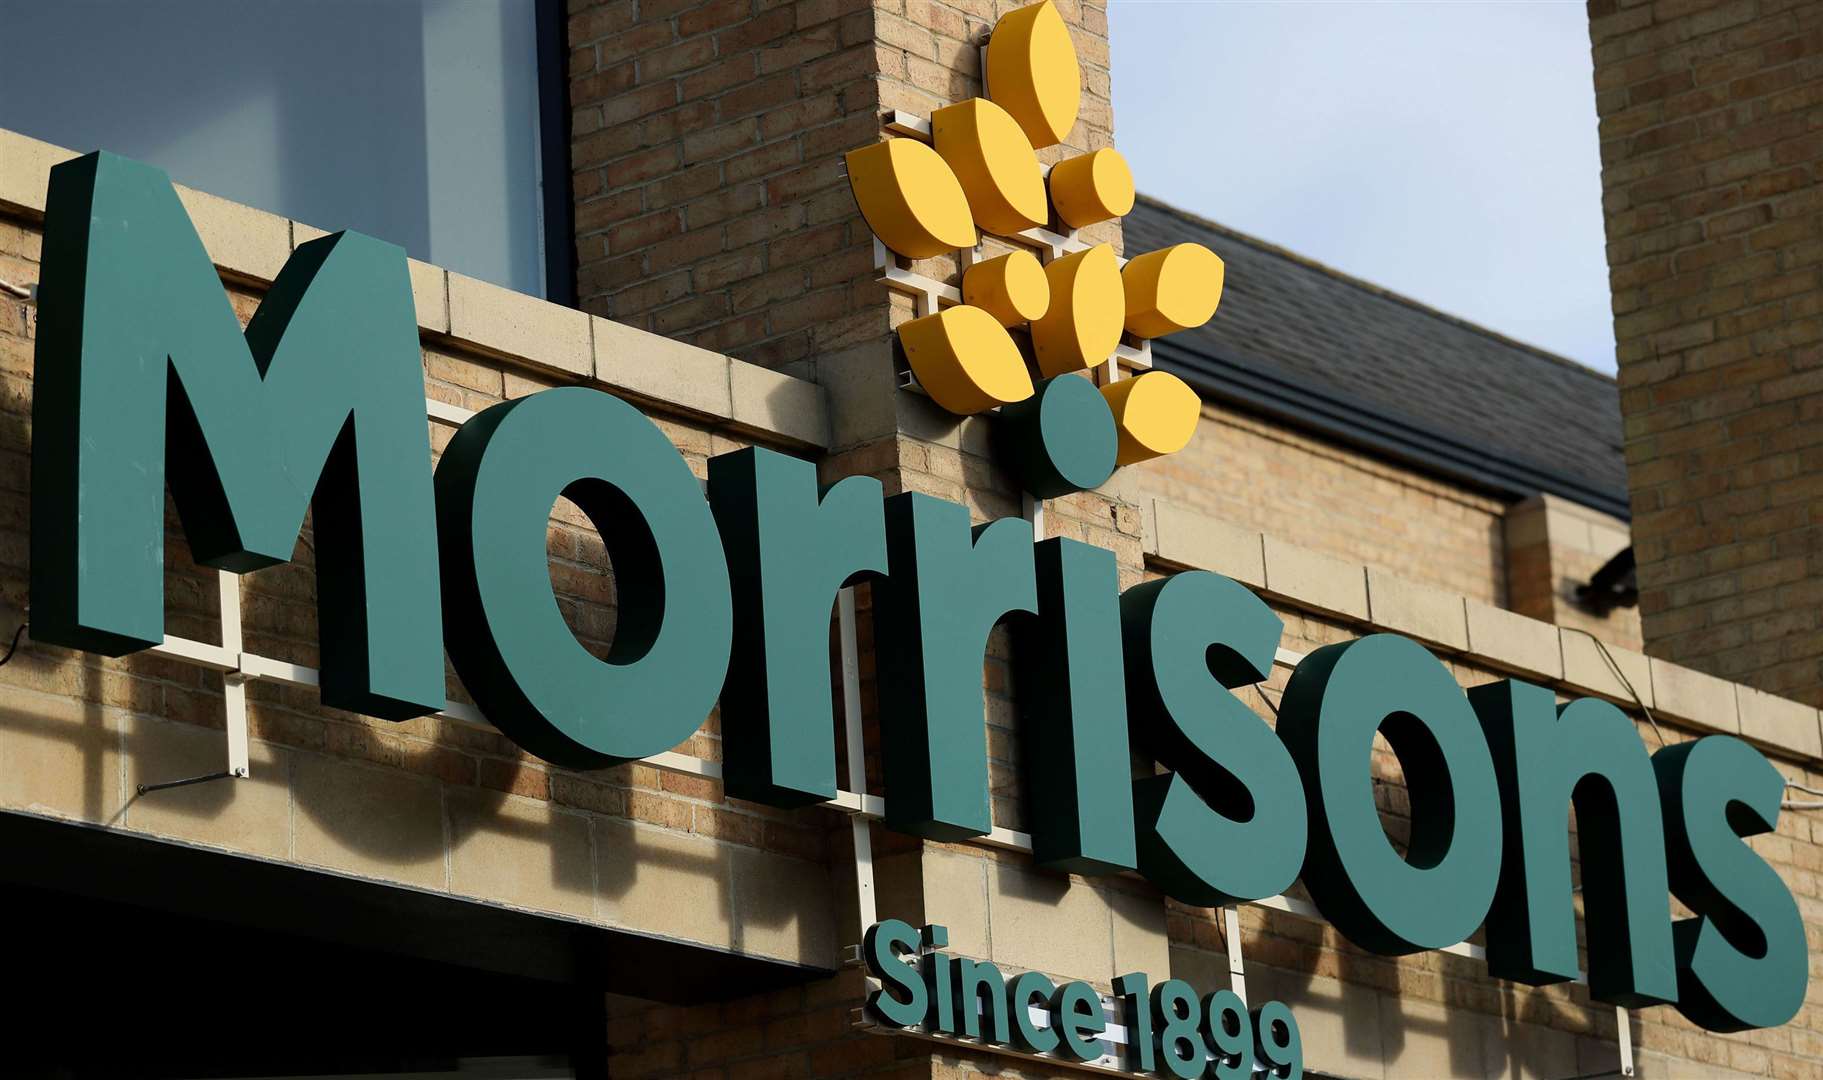 Morrisons operates around 500 stores across the country serving around a million customers every week.